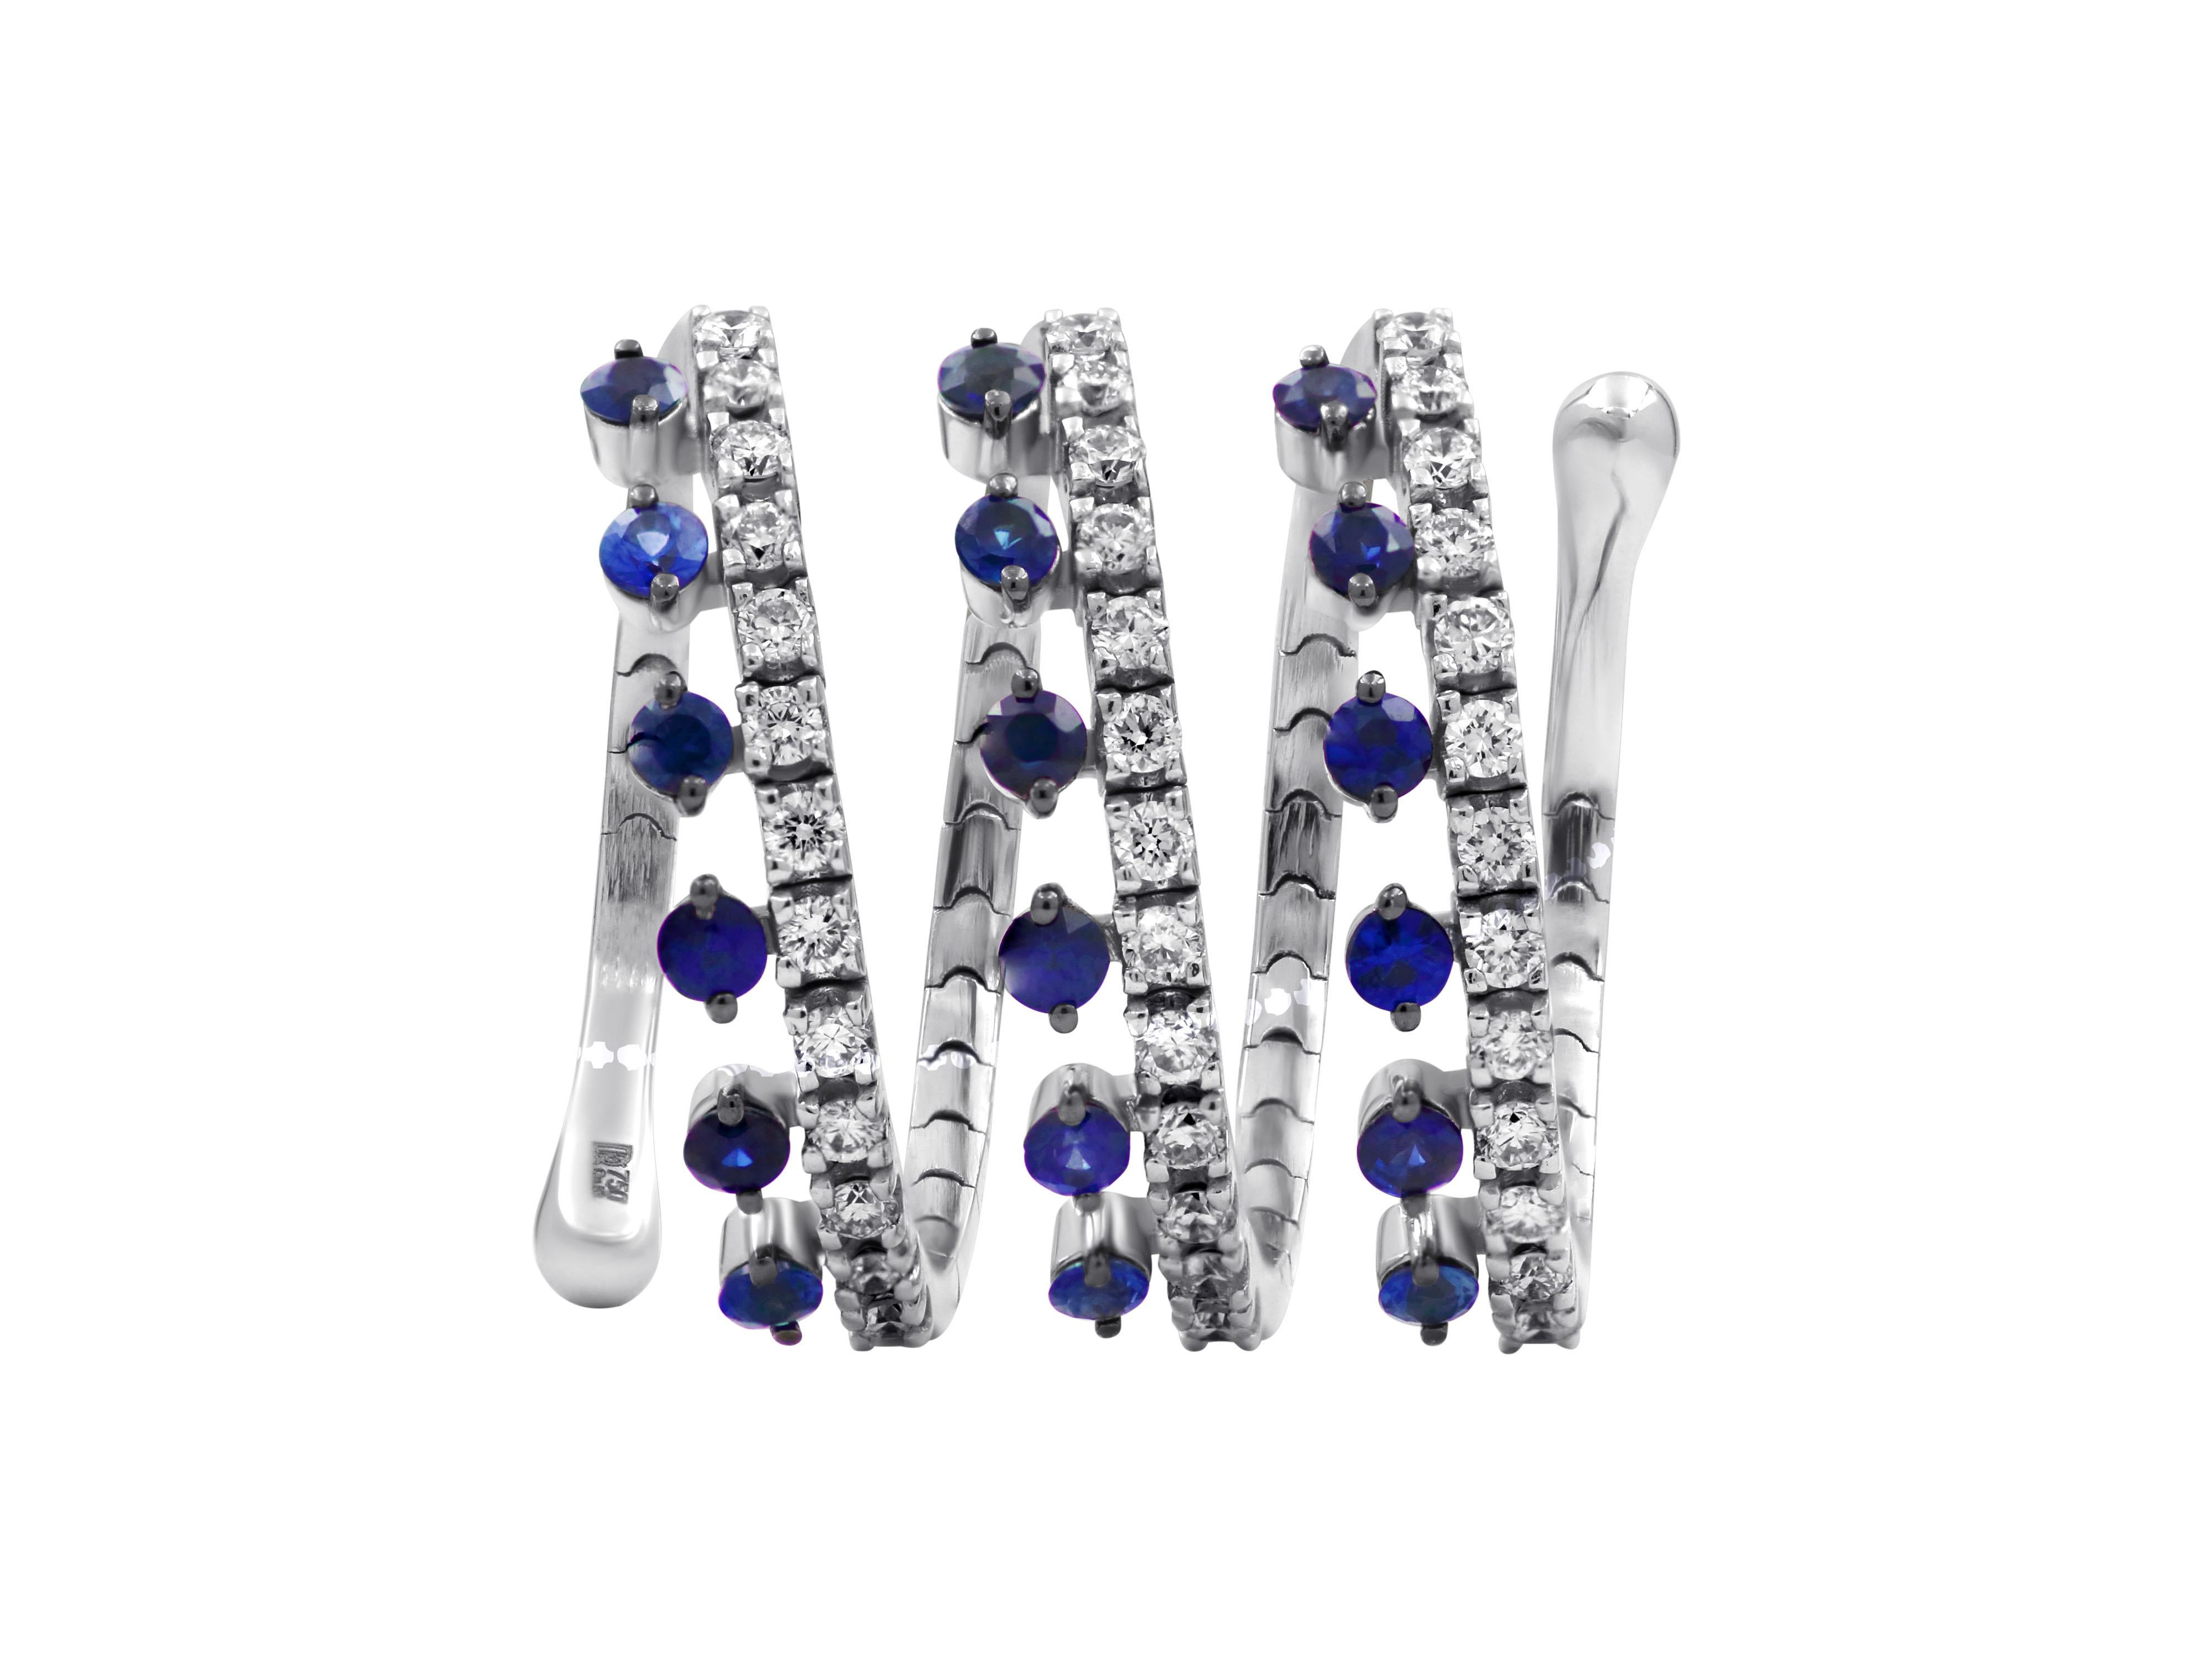 Flexible 18k white gold spiral ring with 0.74 carats blue sapphires and 0.49 carats brilliant cut diamonds

Length: 0.669”, 1.7cm
Width: Adjustable 